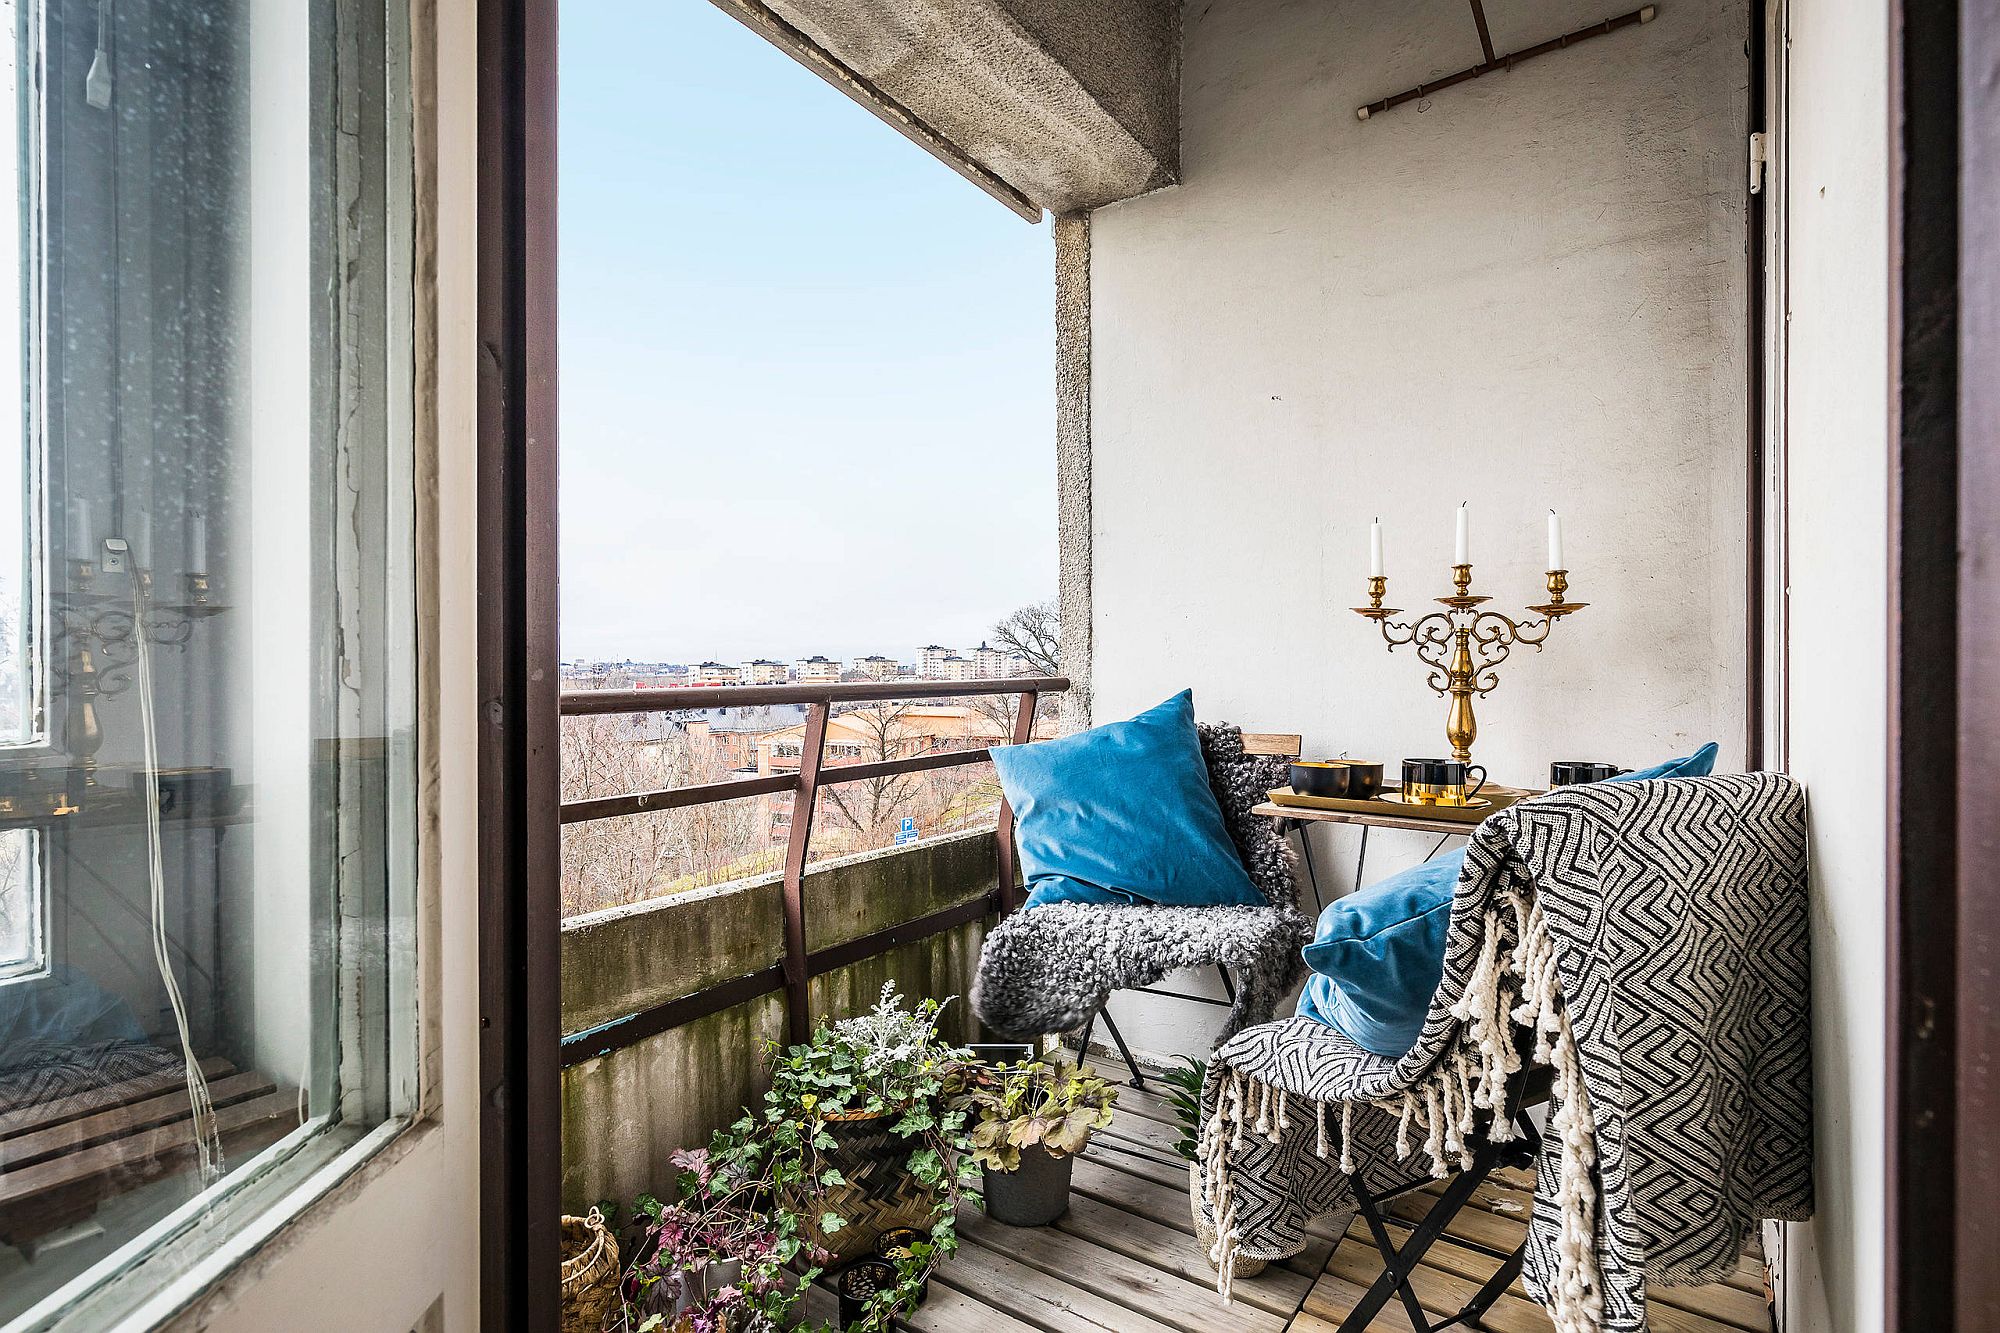 Classy-eclectic-approach-to-decorating-the-small-balcony-for-a-special-lunc...